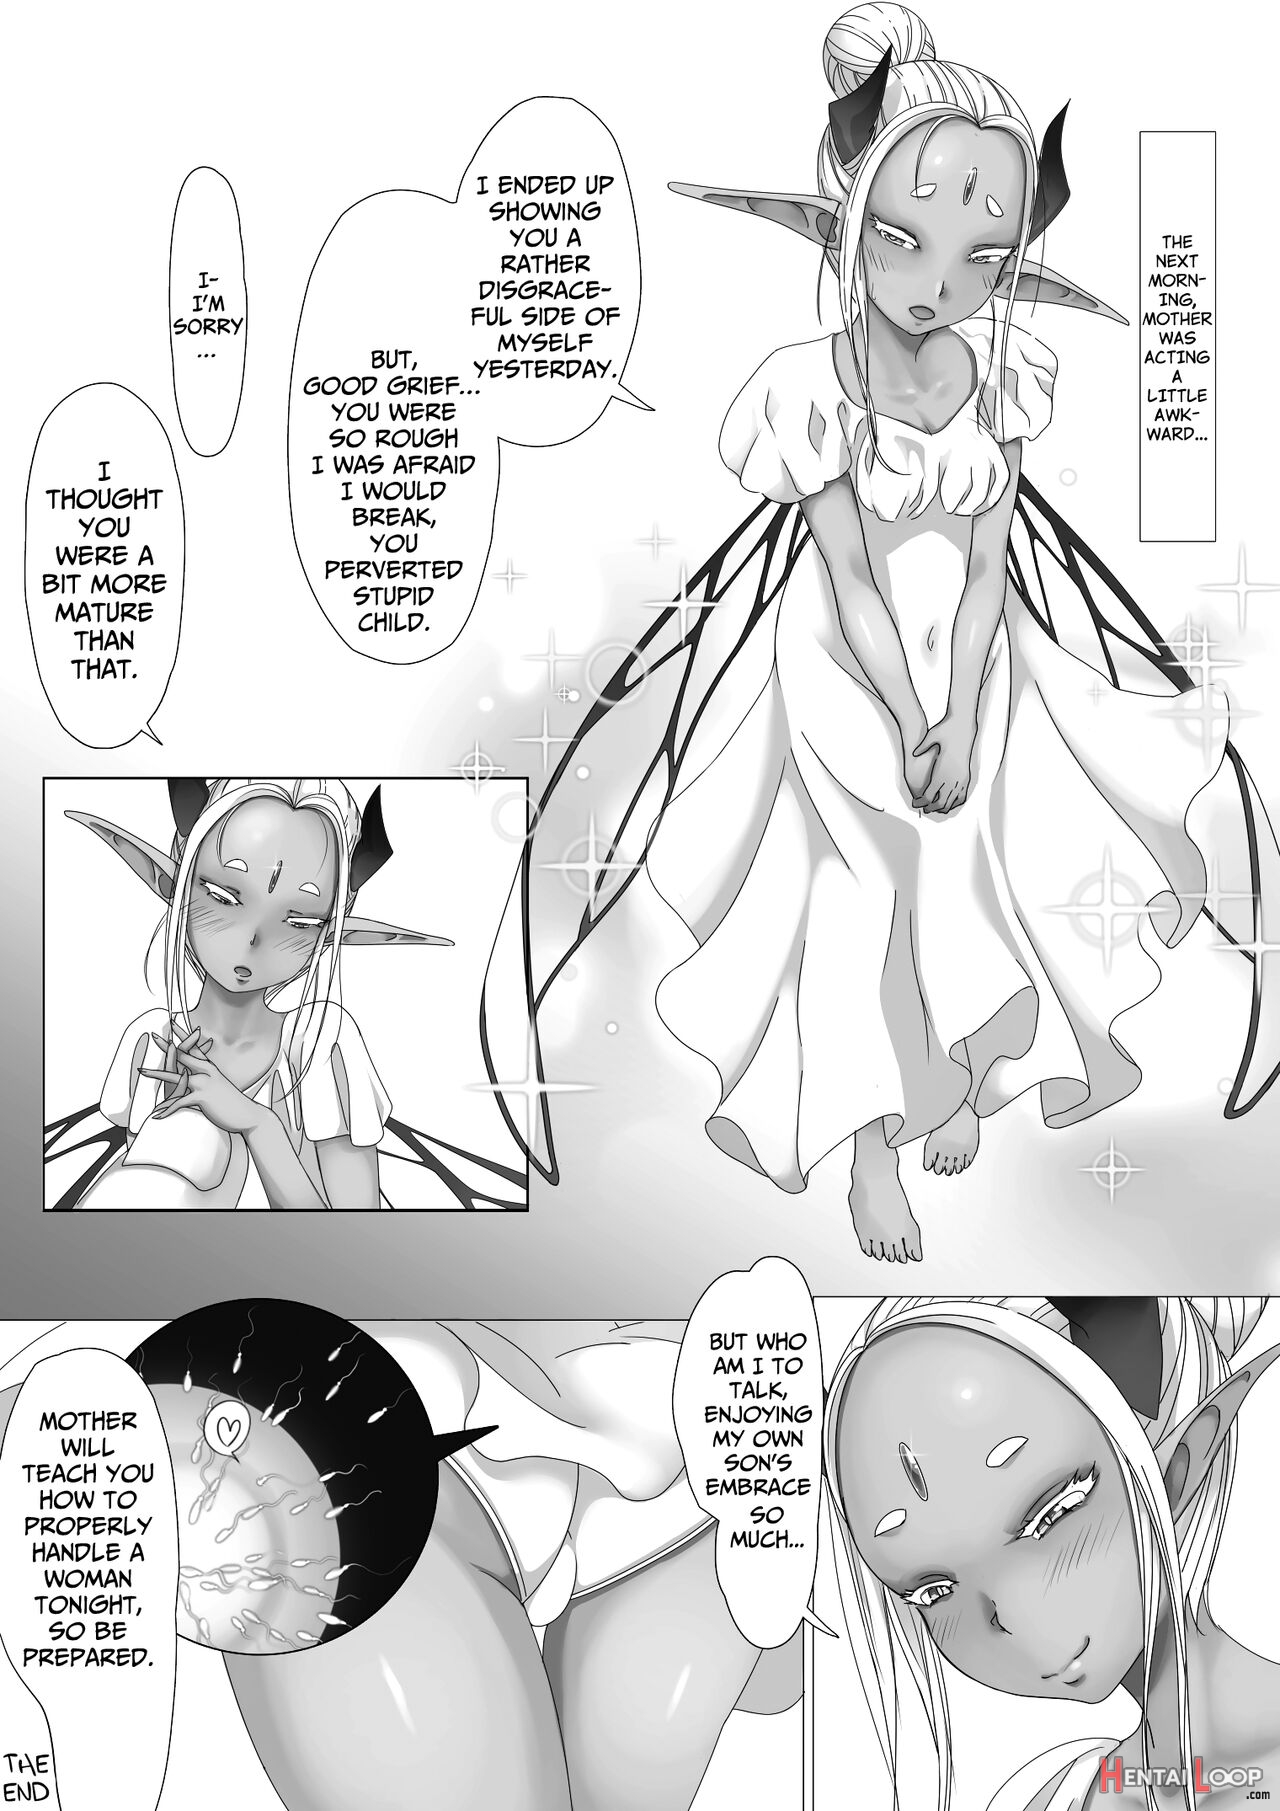 the Story Of A Fairy Mother Mating With Her Son Until She's Pregnant With His Child page 24